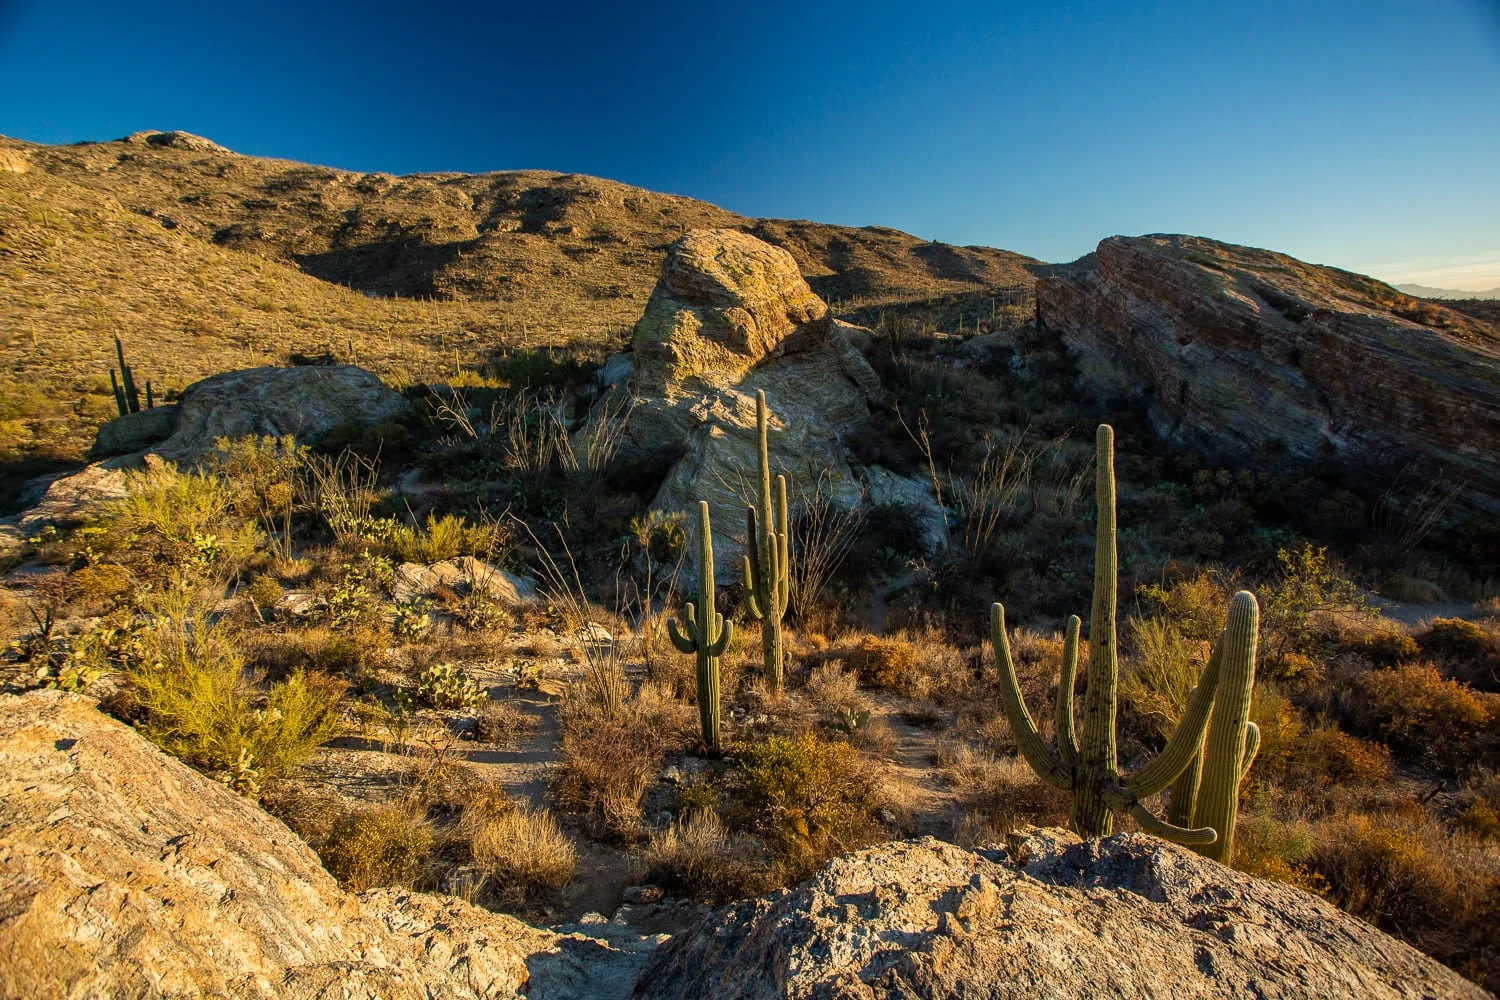 An east saguaro national park elopement location with large rocks and mountains in the background.